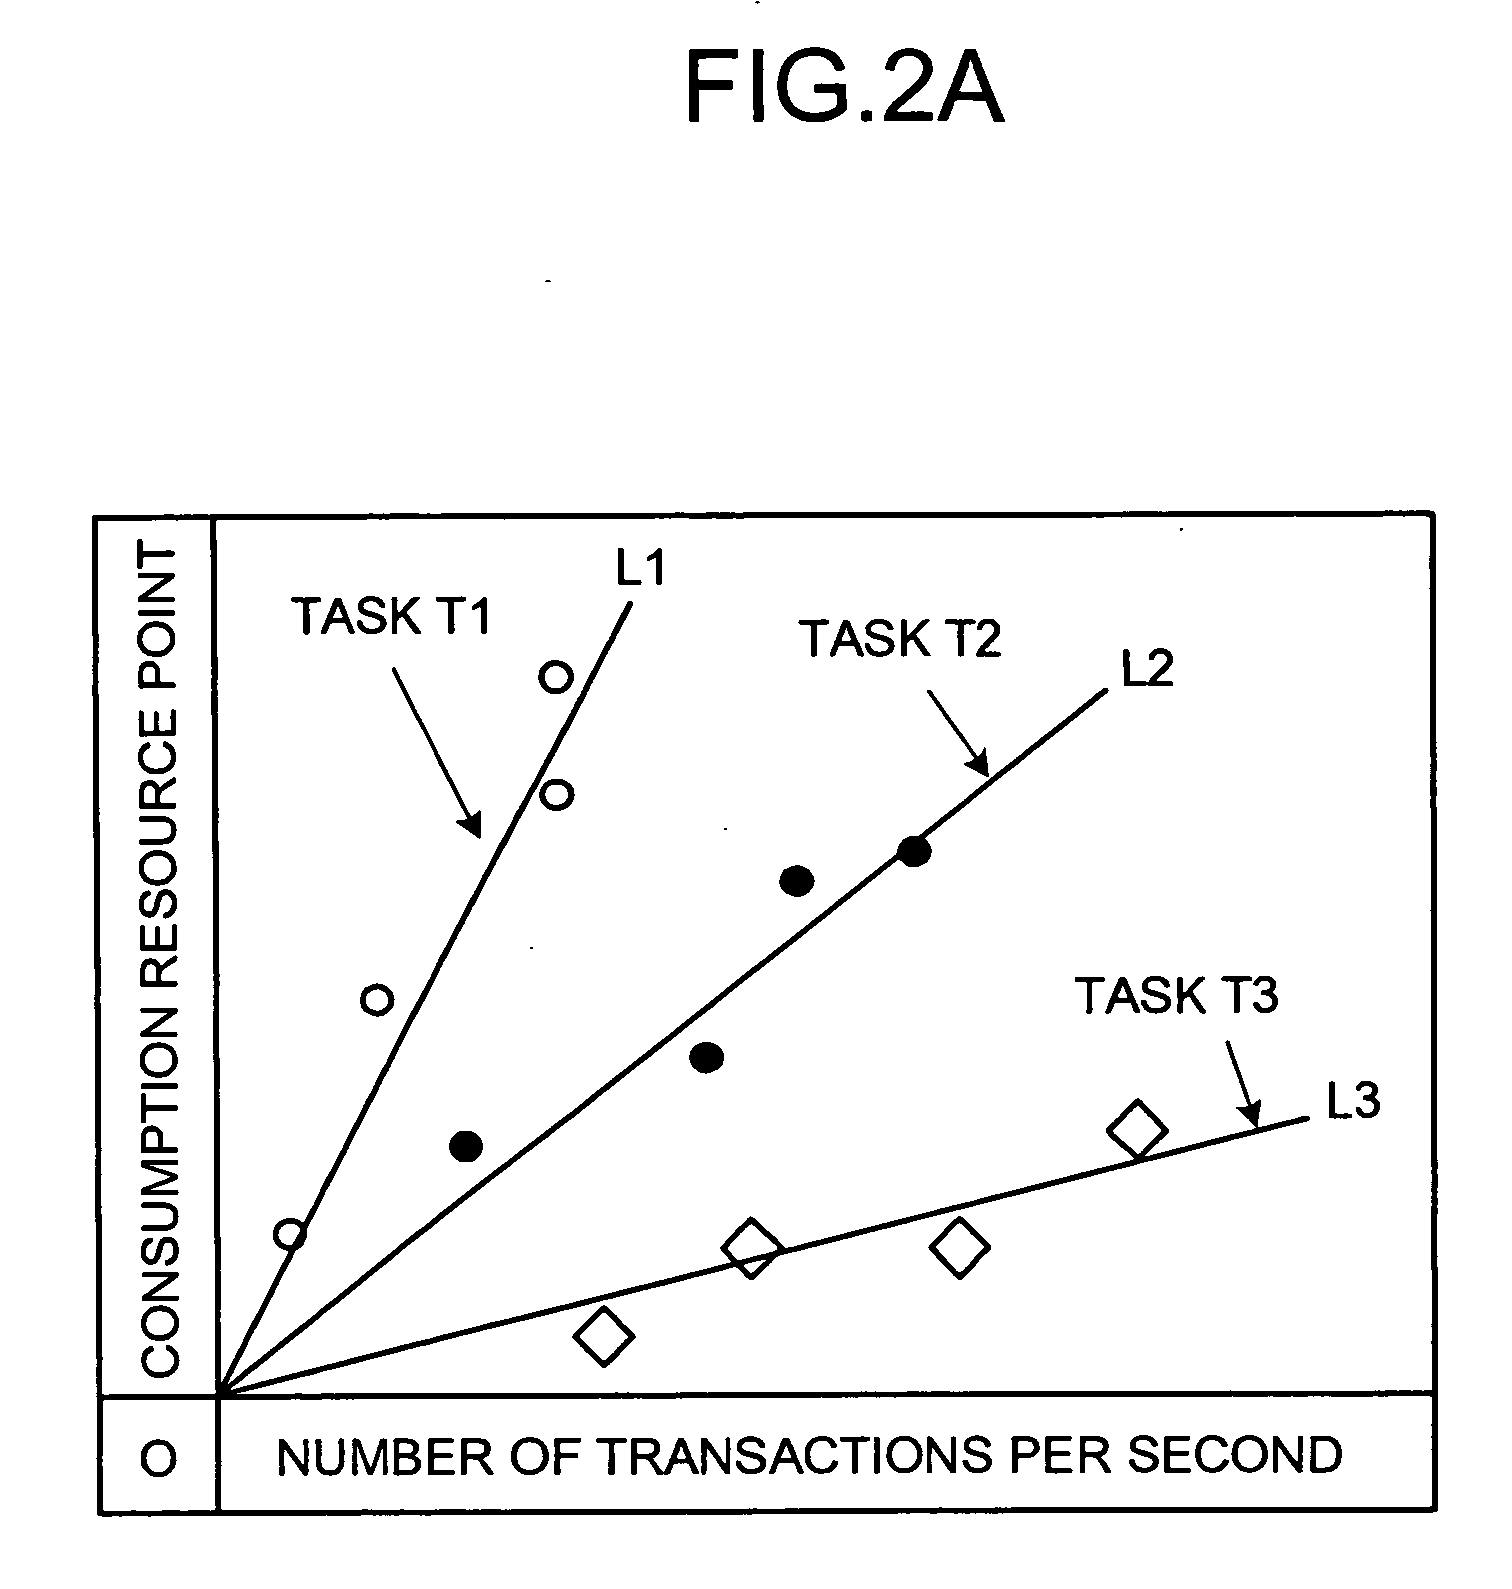 Method and apparatus for creating resource plan, and computer product